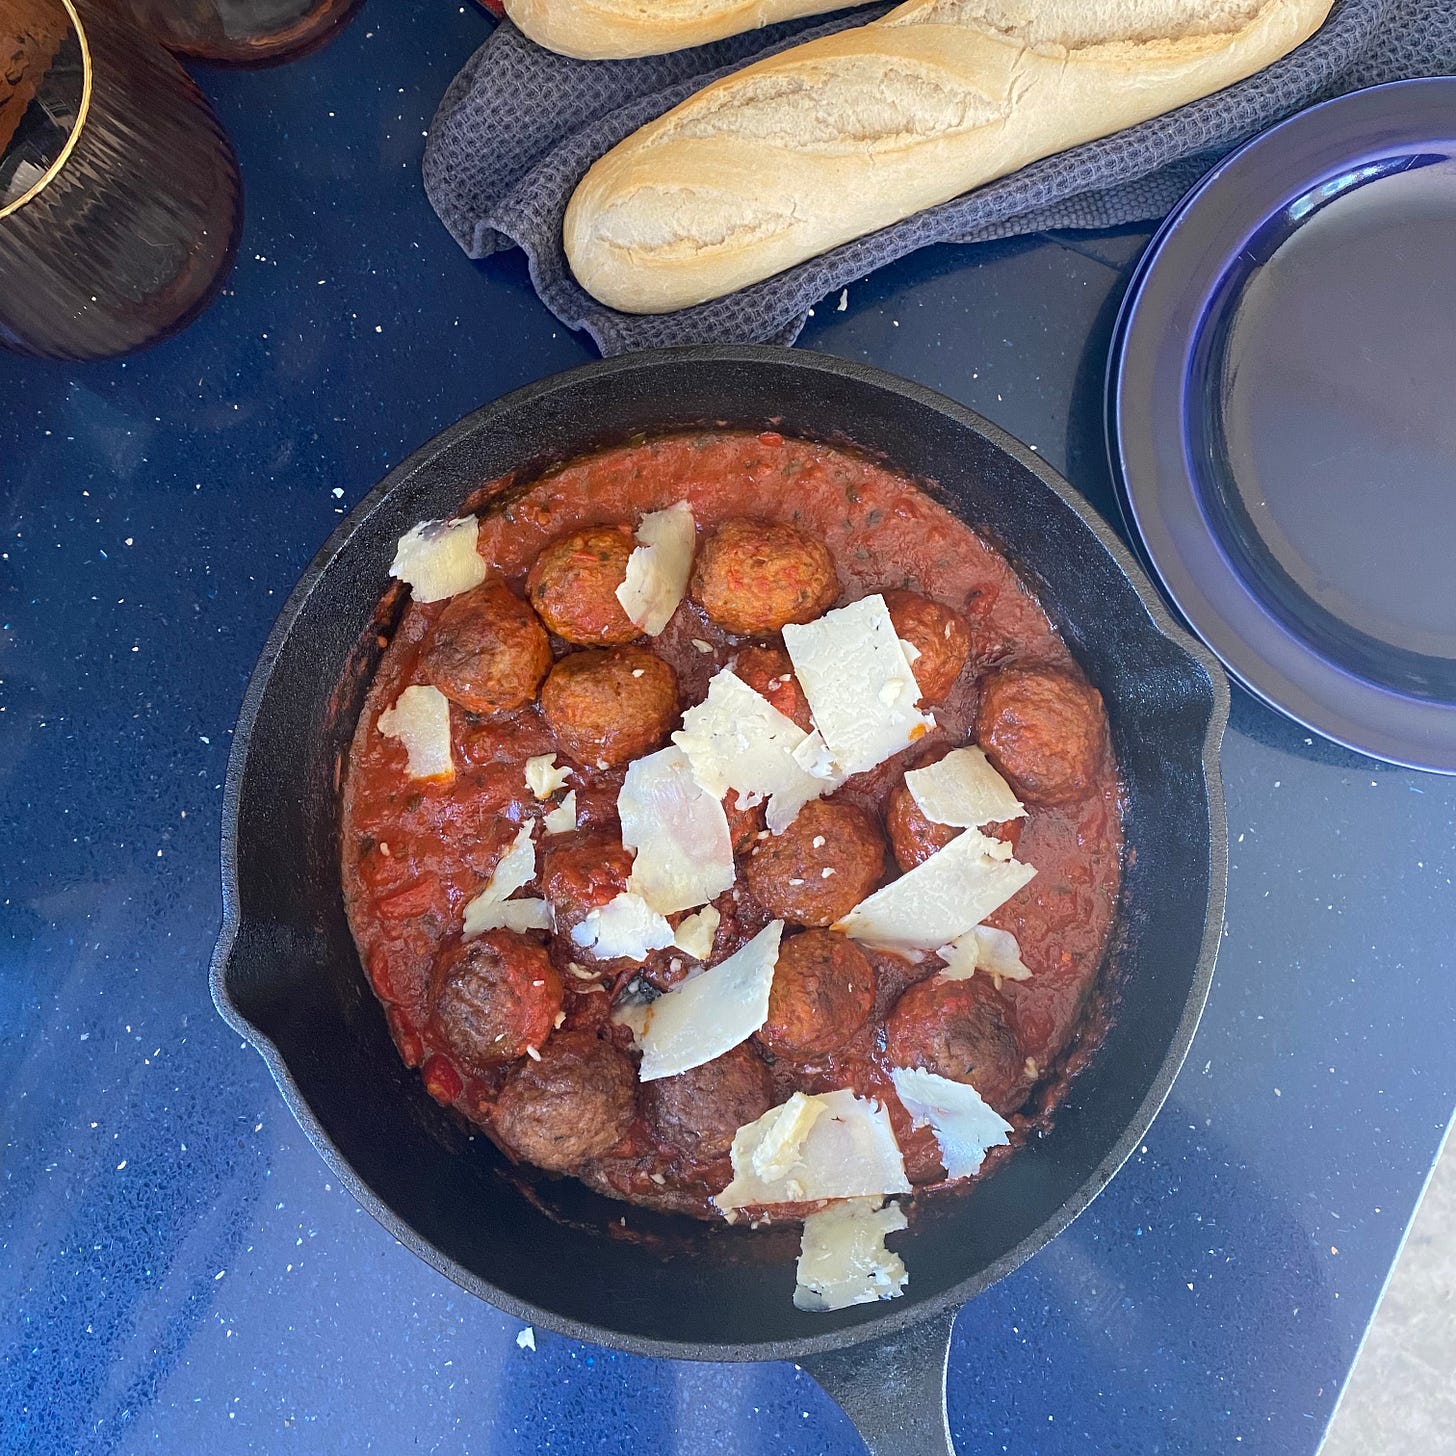 Skillet pan of meatballs in tomato sauce, with two baguettes above and blue plates to the side.